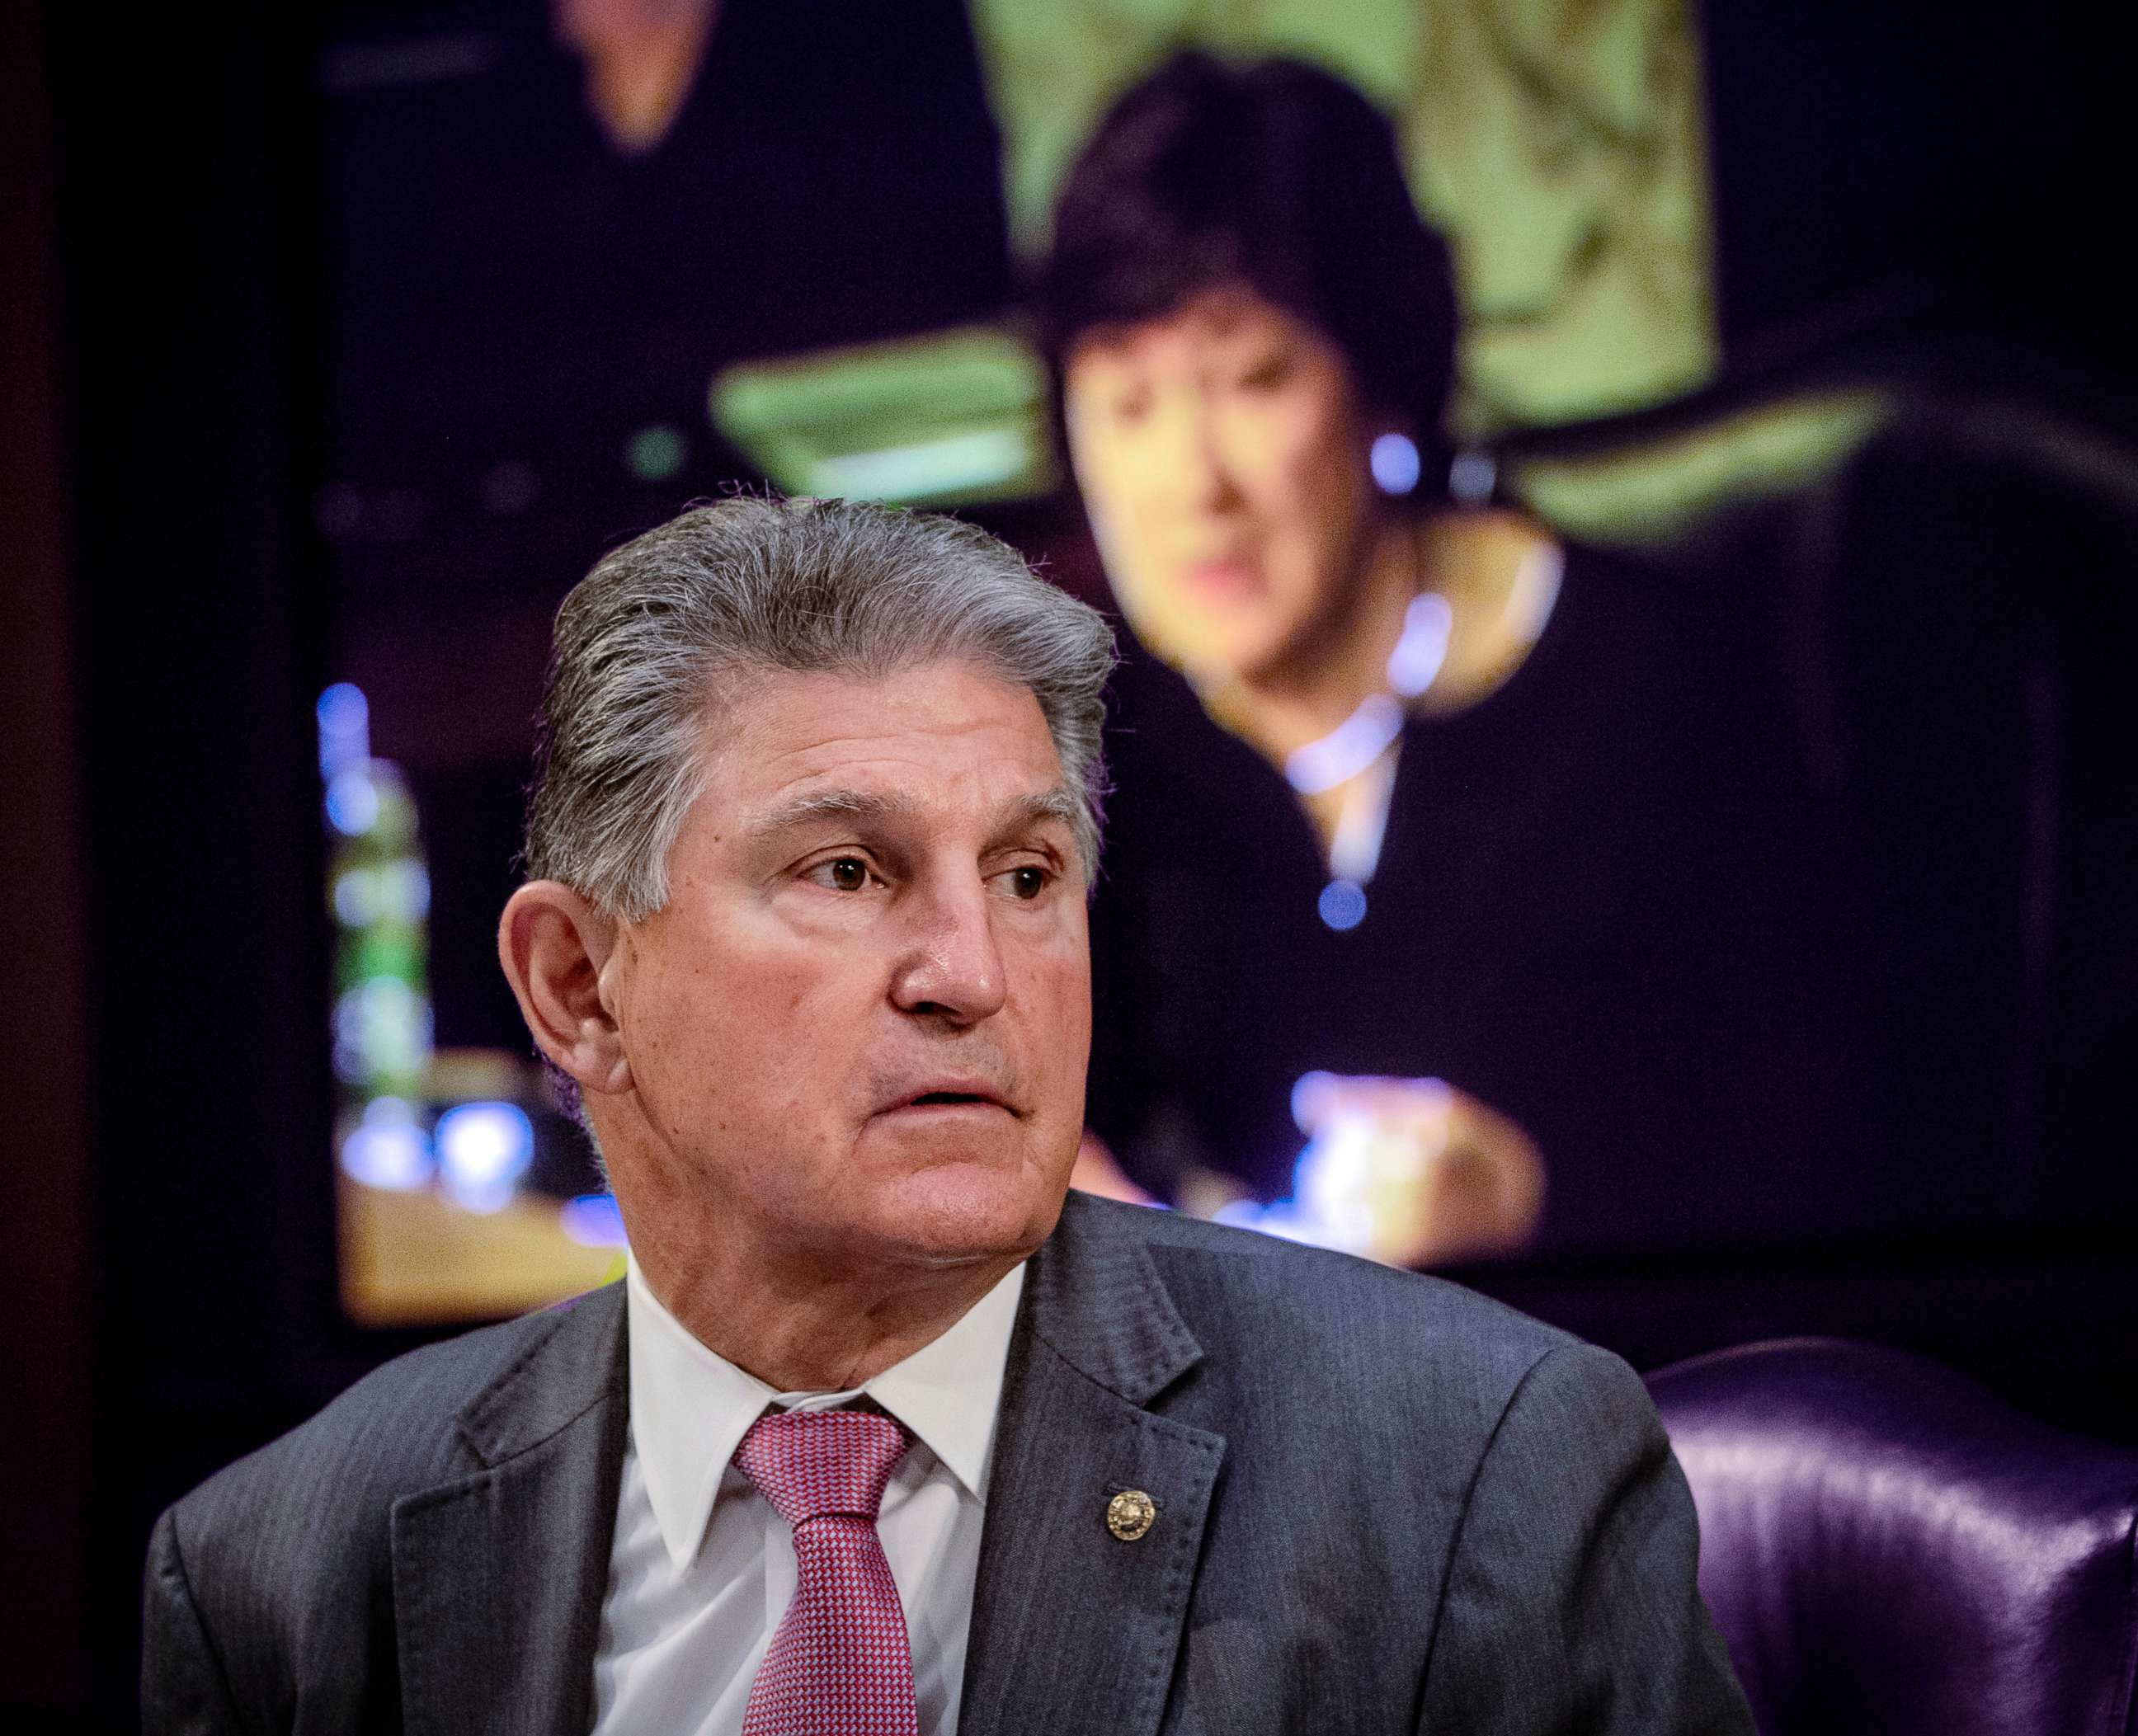 PHOTO: Sen. Joe Manchin listens during the Senate Appropriations committee hearing to examine domestic violent extremism, on May 12, 2021, in Washington.